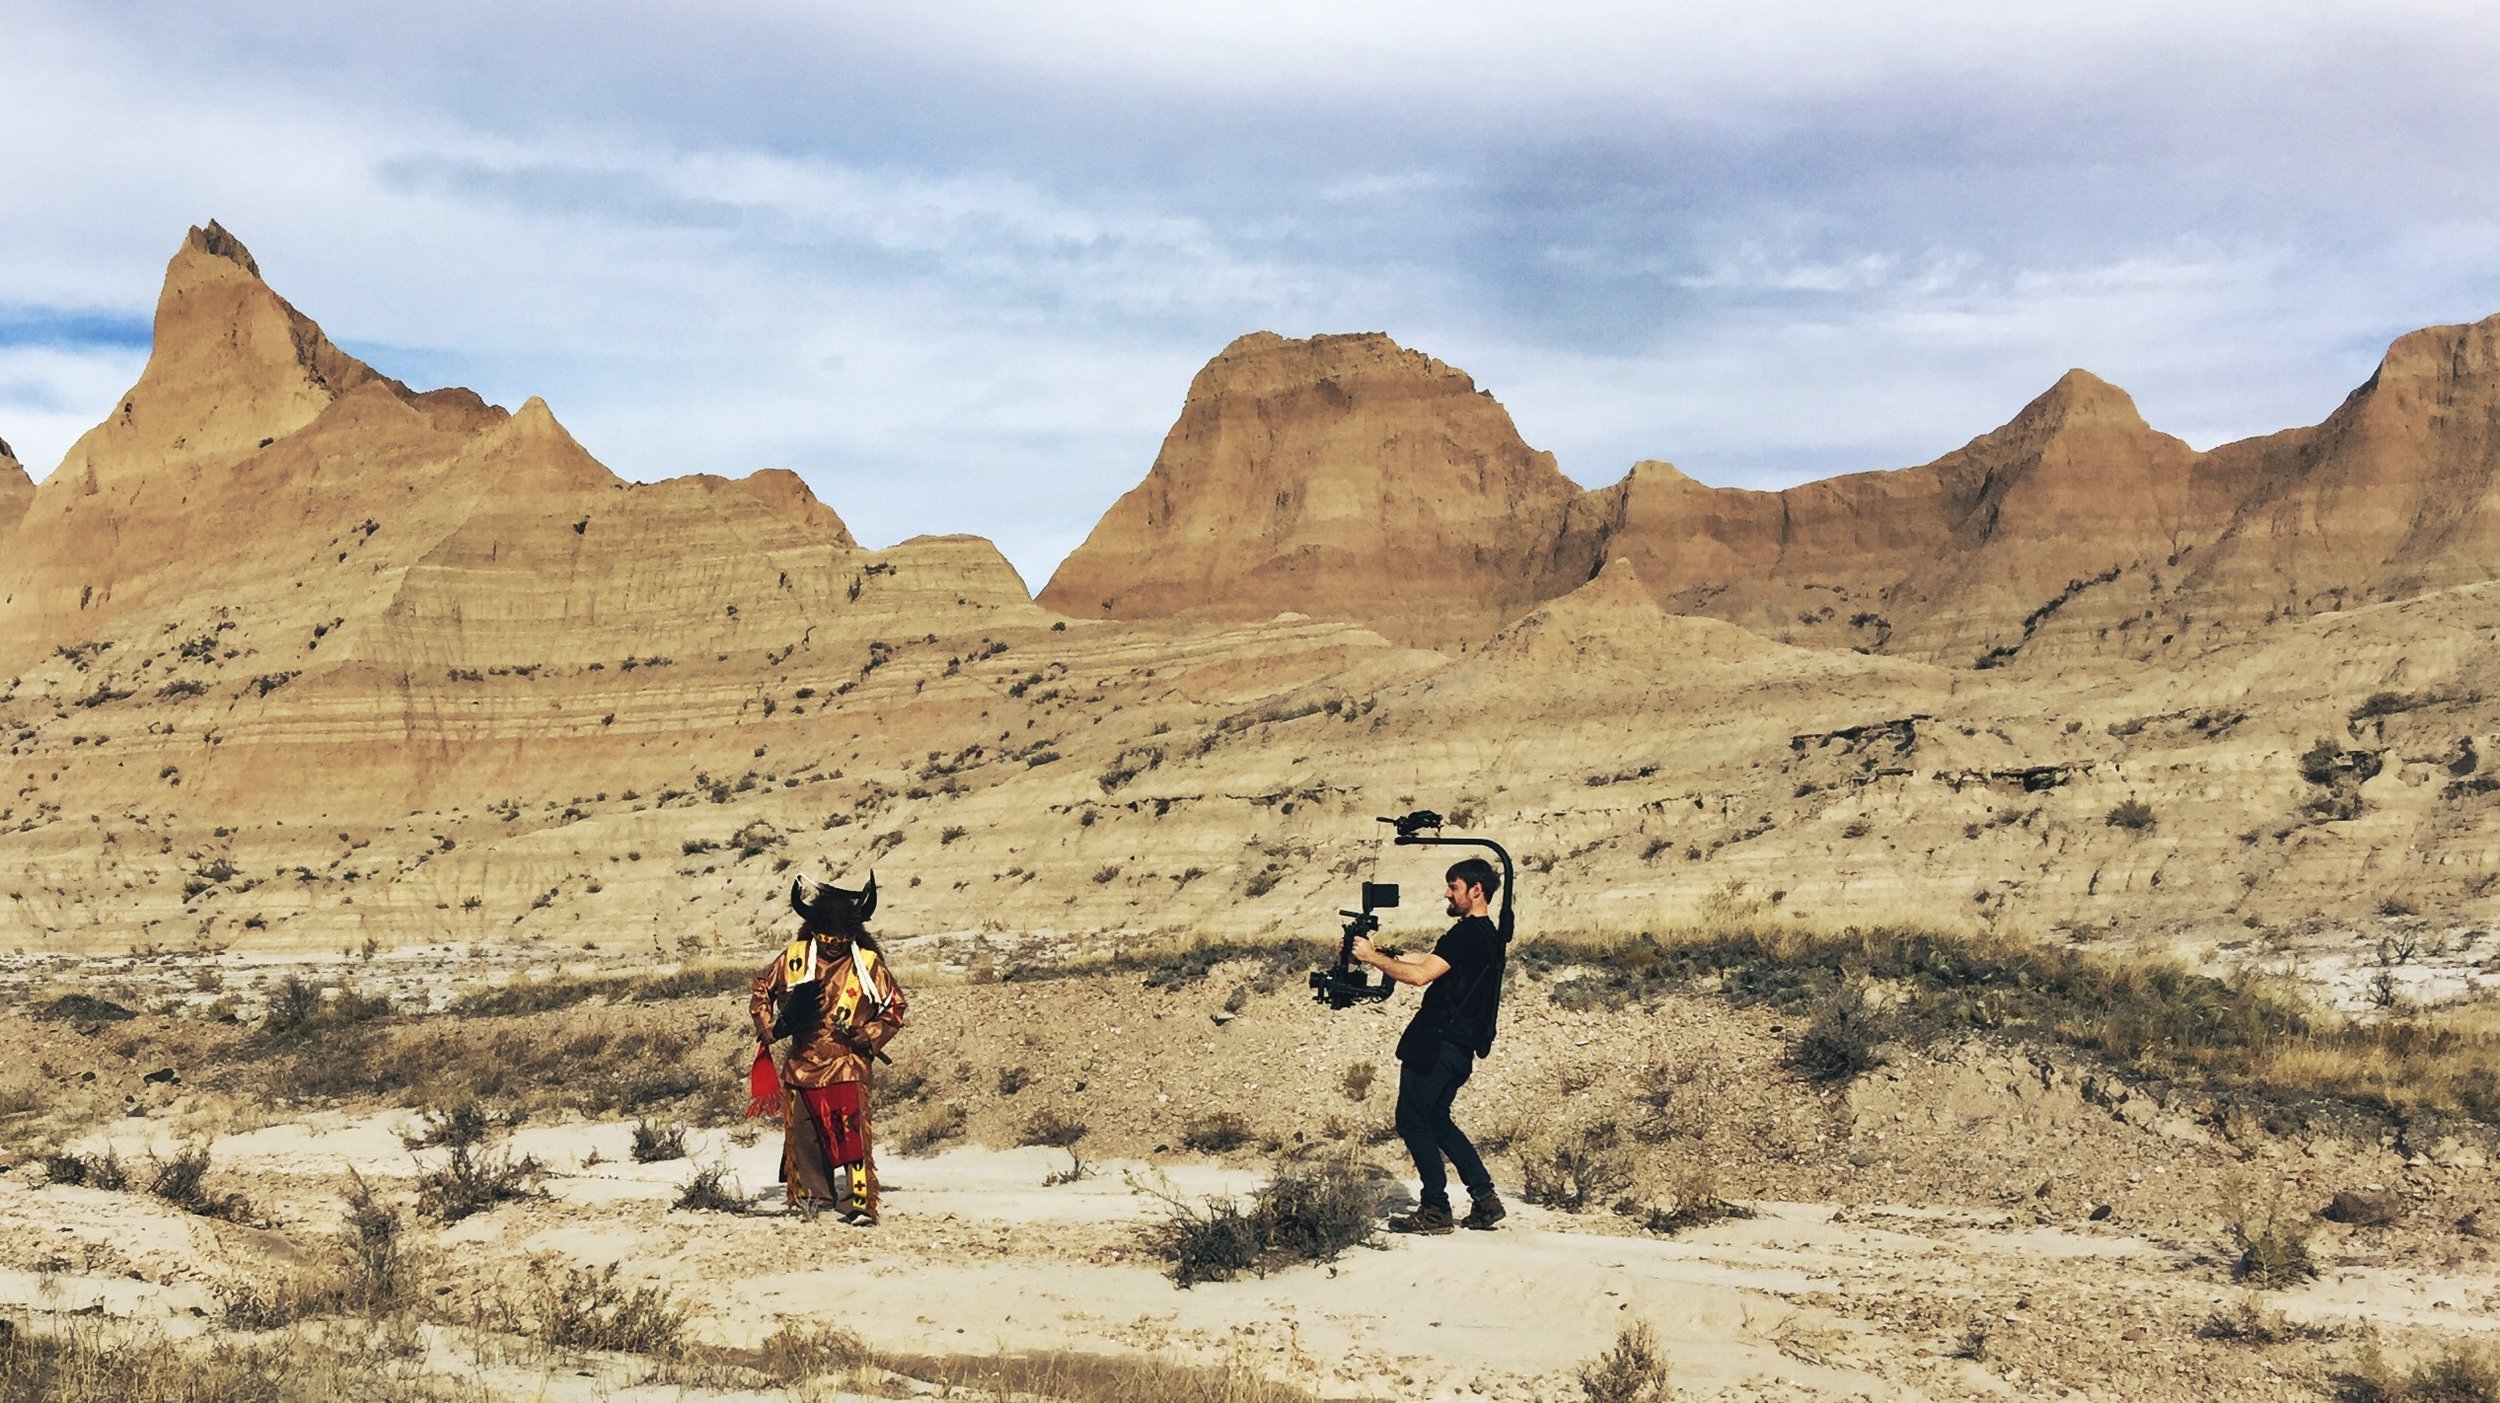 Filming in the Badlands